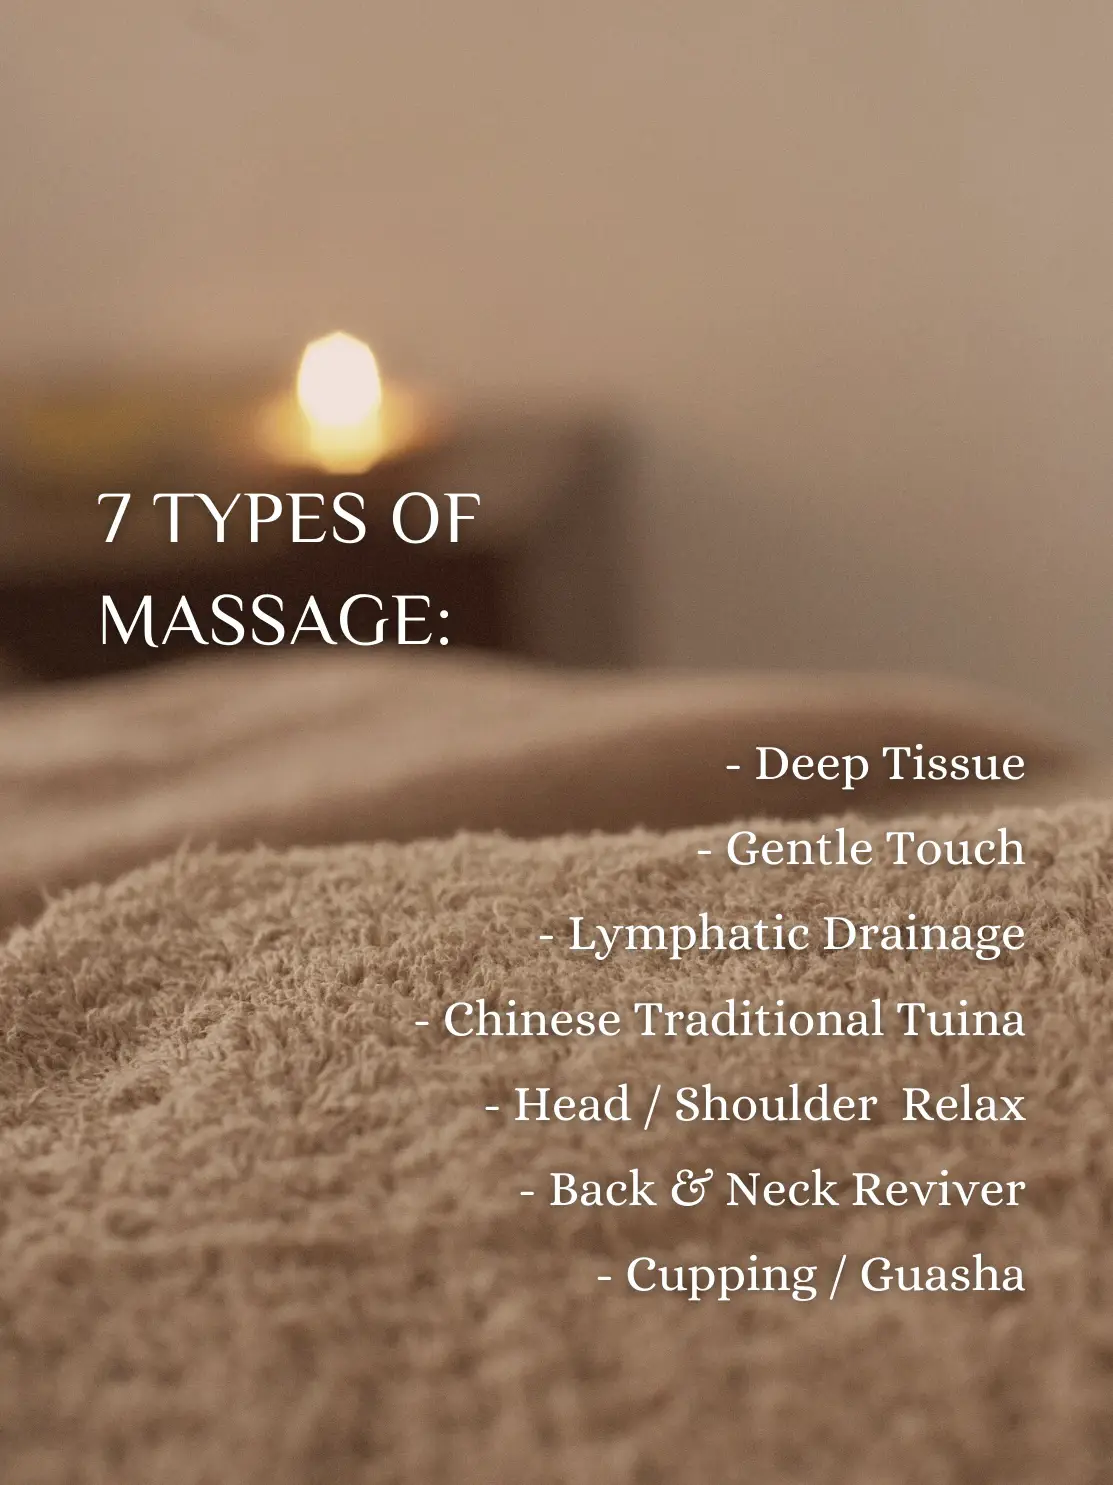 What Are The 7 Types Of Massage?